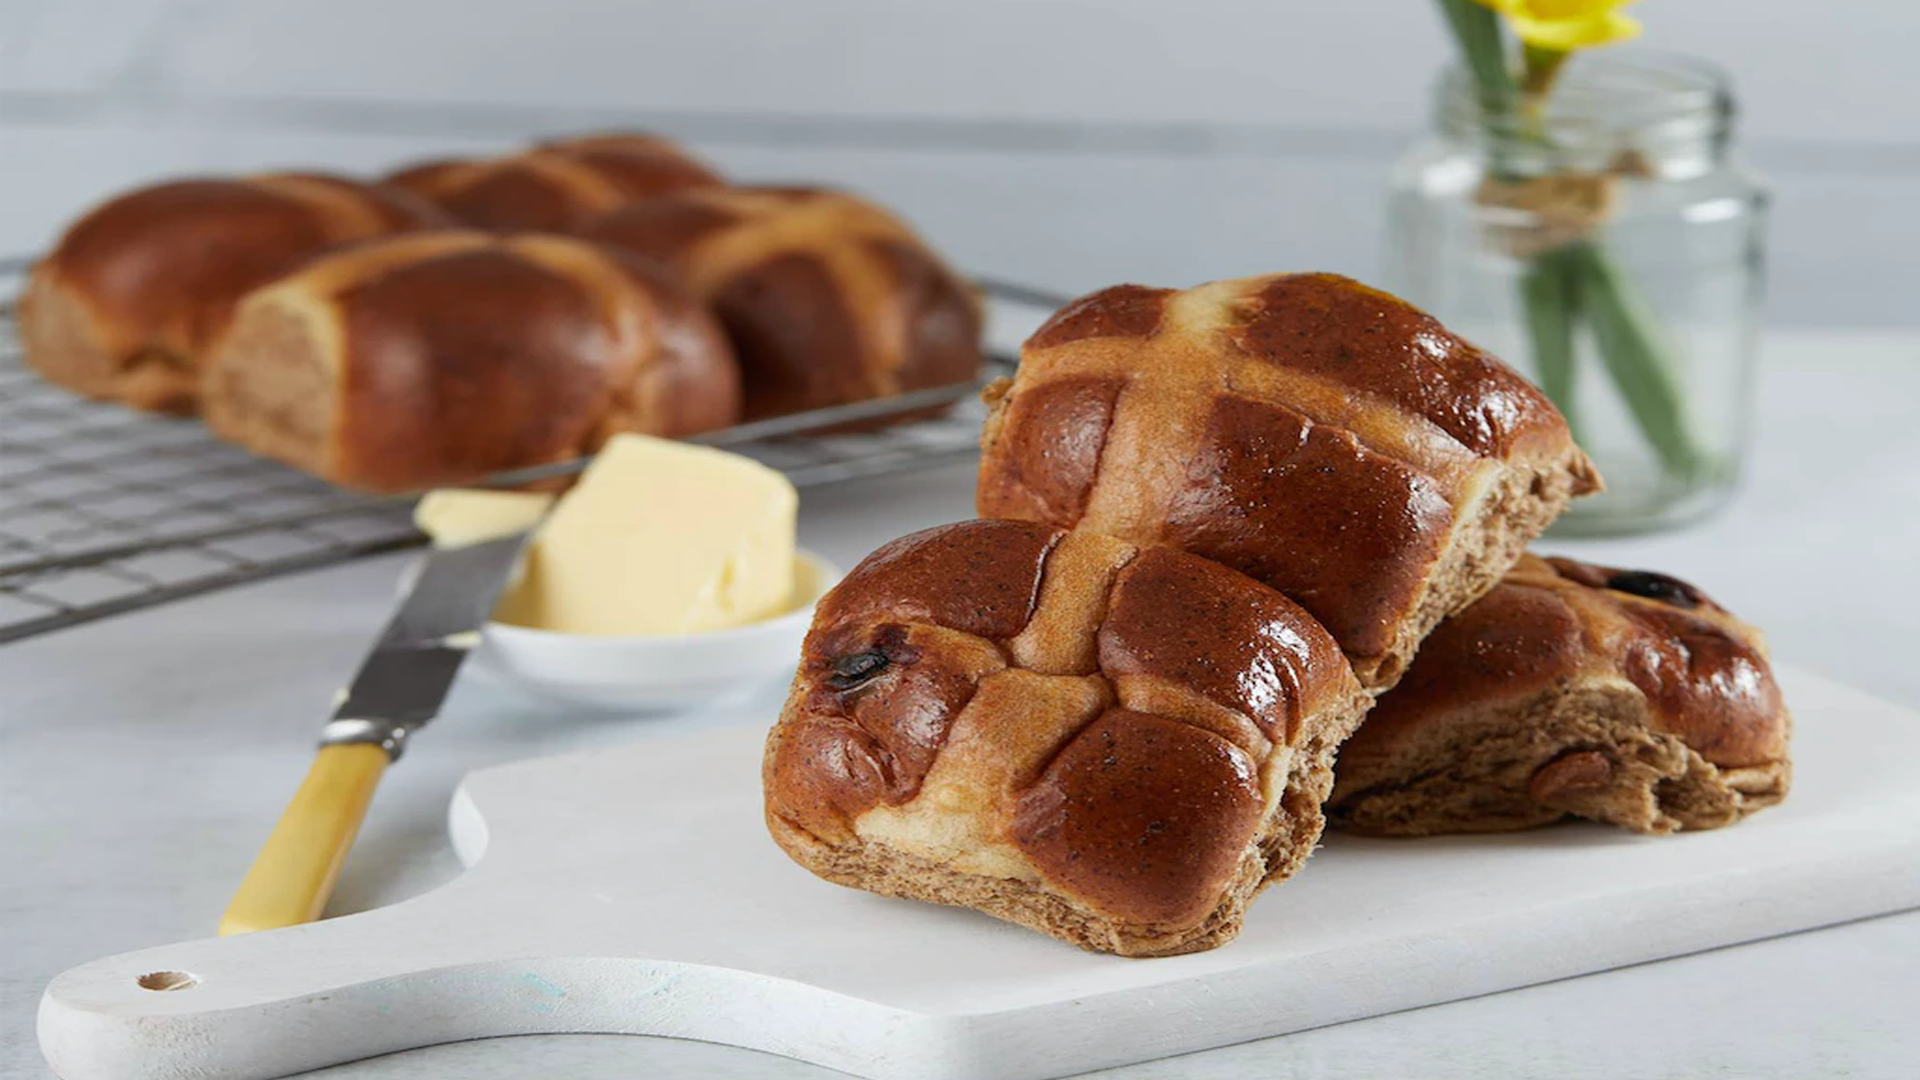 Fresh hot cross buns on a white tray. There is a buttered knife next to them, and a glass vase filled with daffodils.